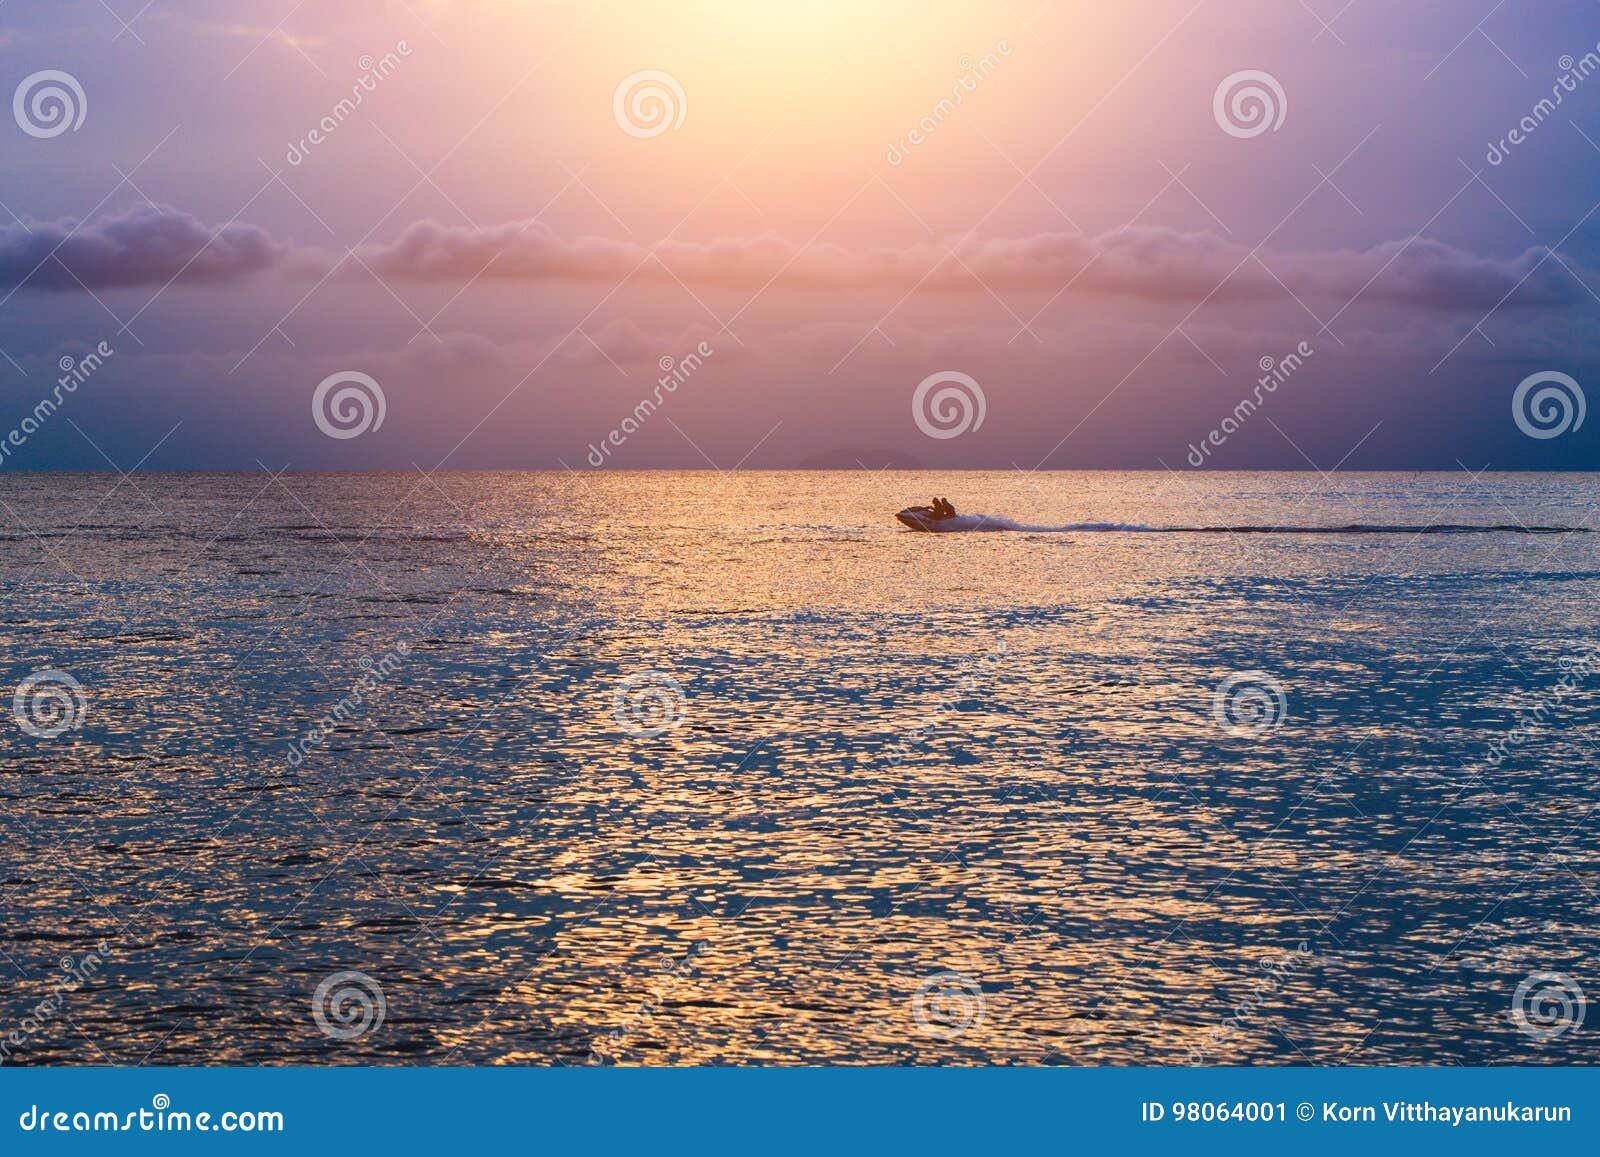 Calm Sea Wave Sunset View Blue Water Ocean Stock Image Image Of